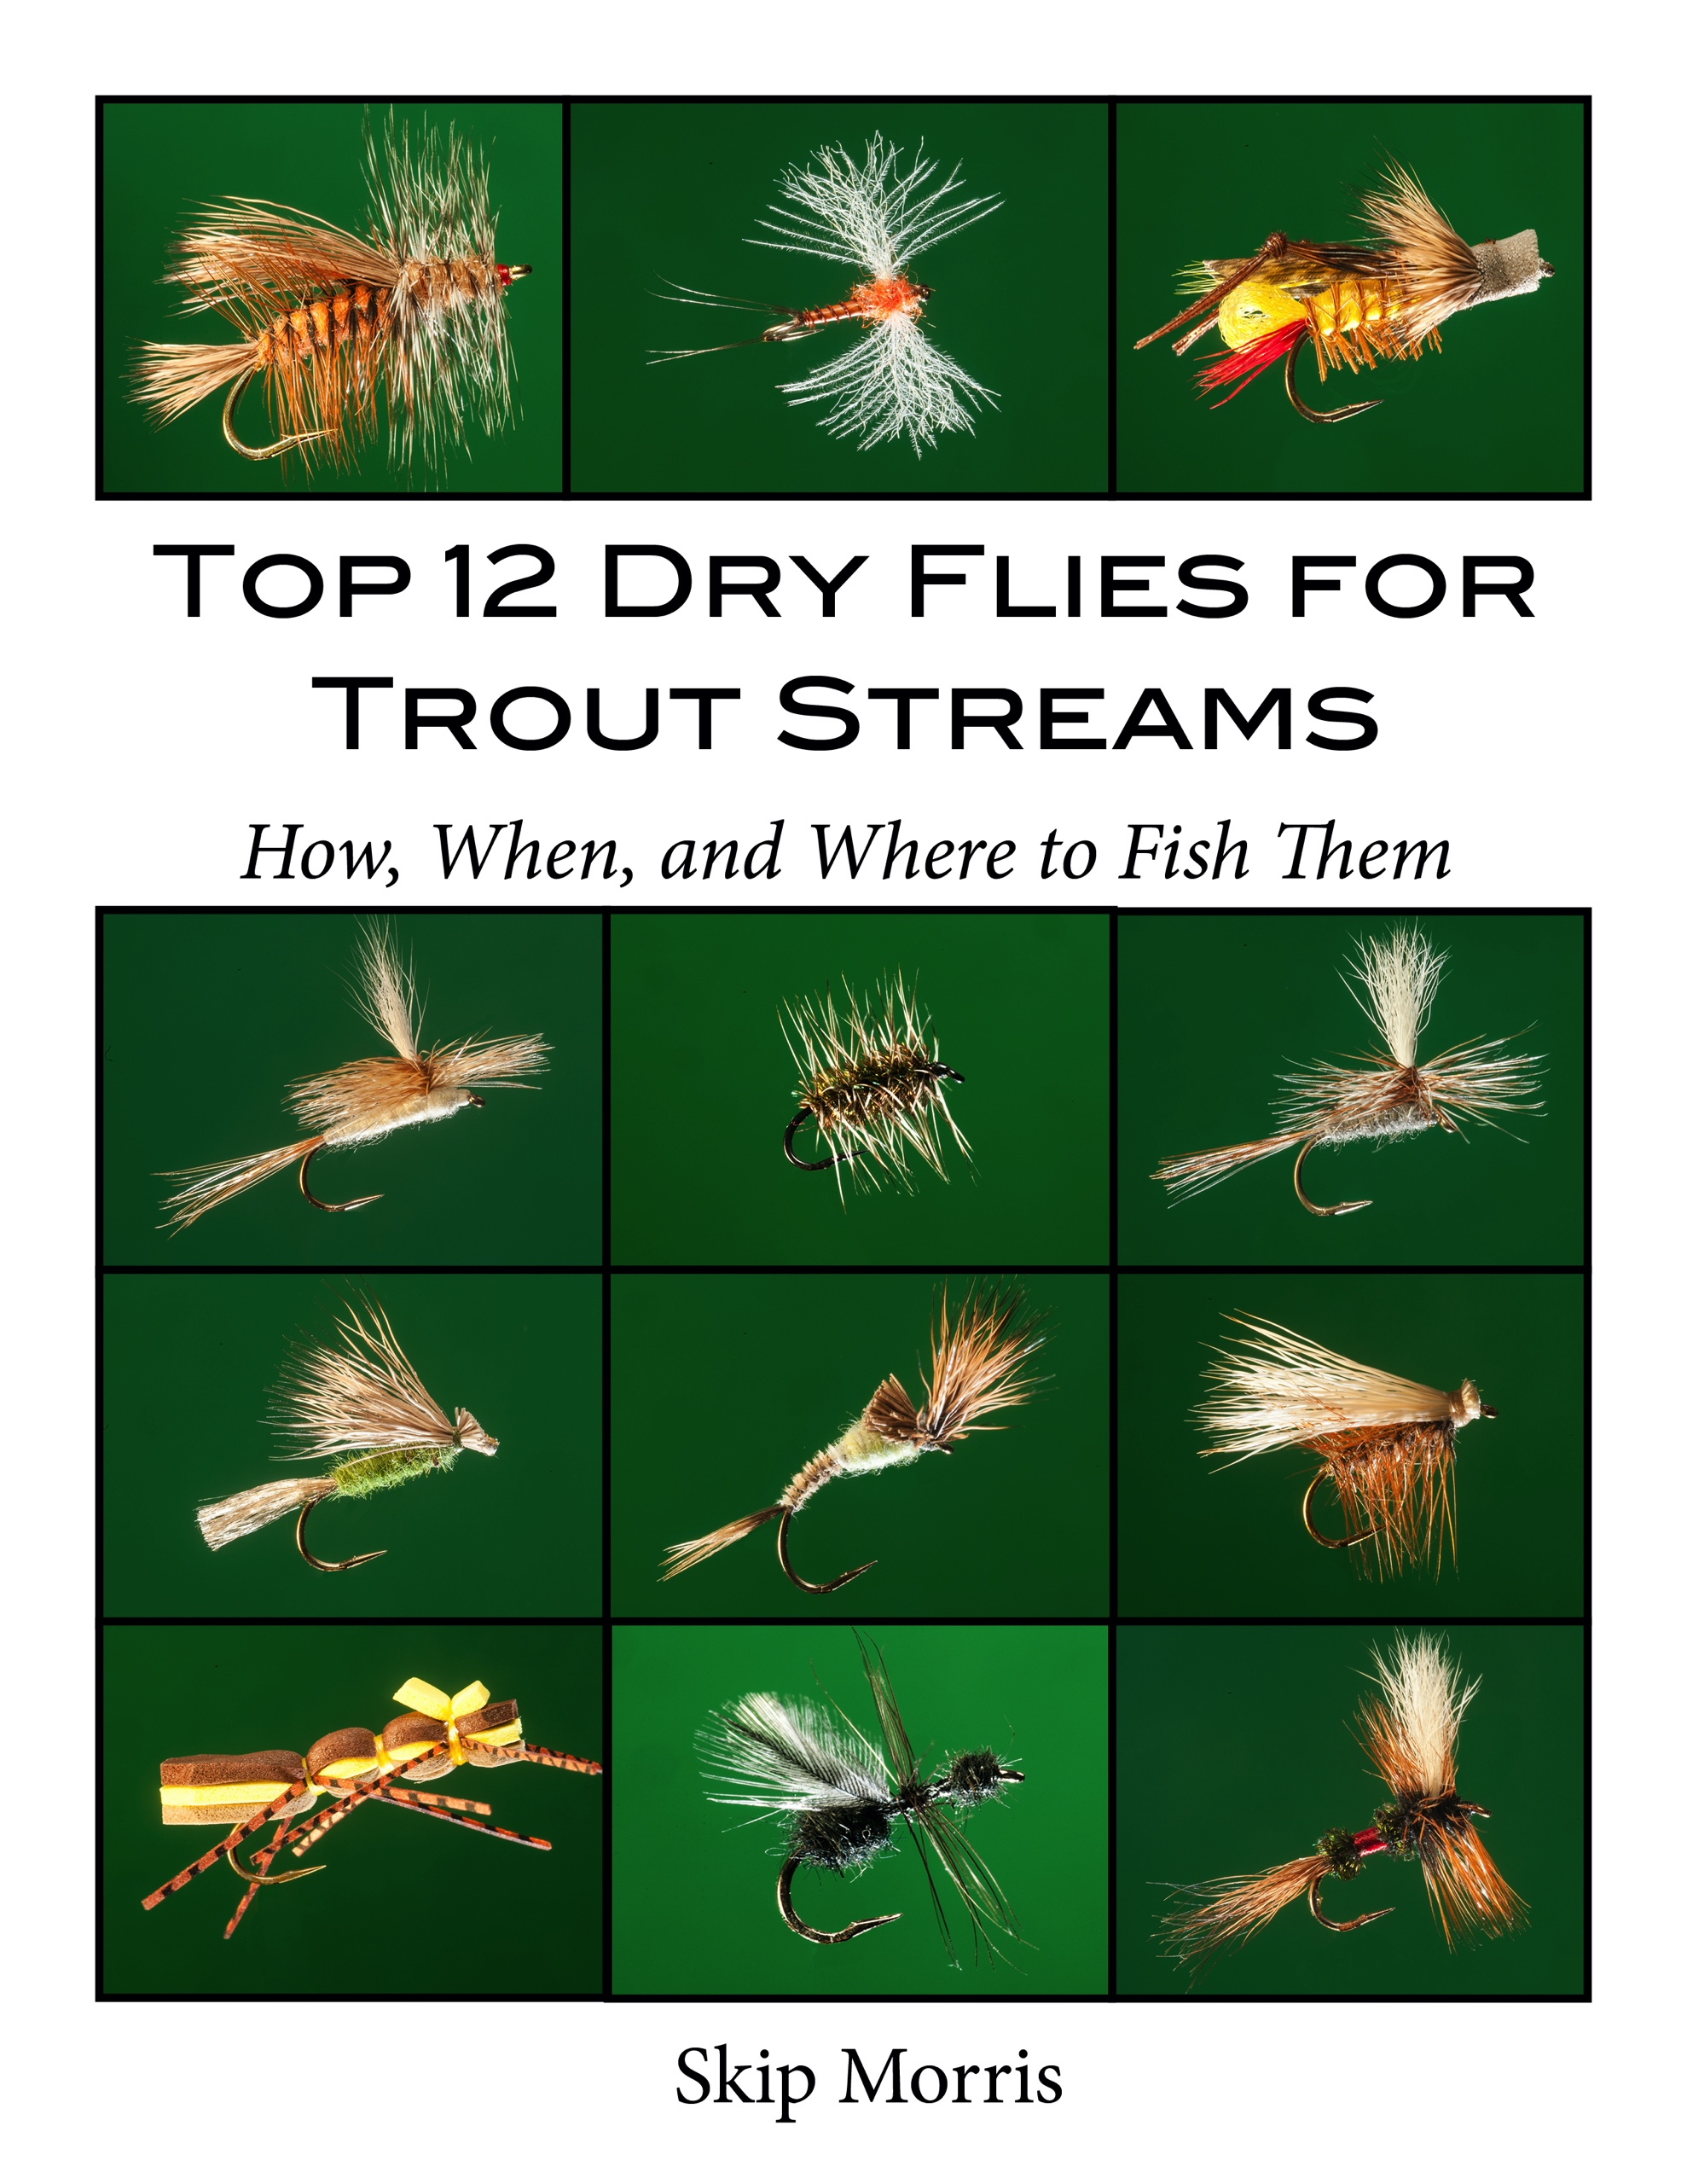 Top 12 Dry Flies for Trout Streams: How, When, and Where to Fish Them an ebook by Skip Morris